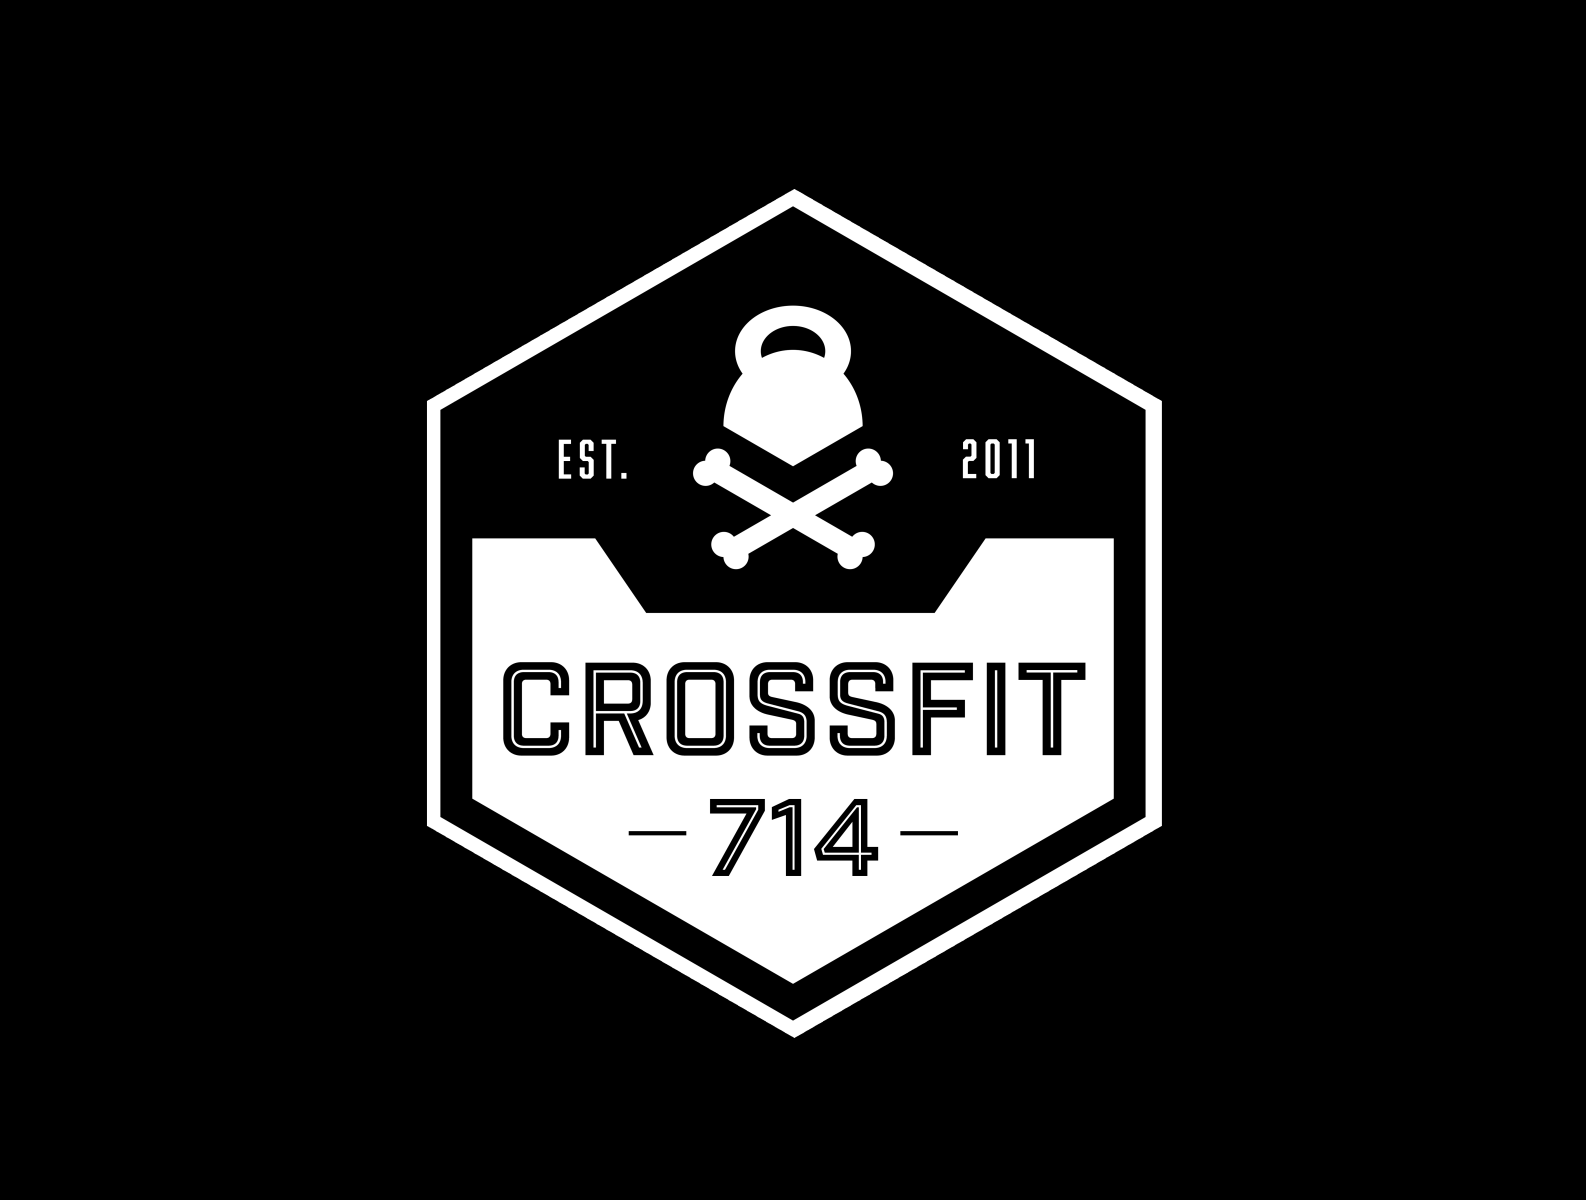 CrossFit Gym Badge by Alex Peters on Dribbble